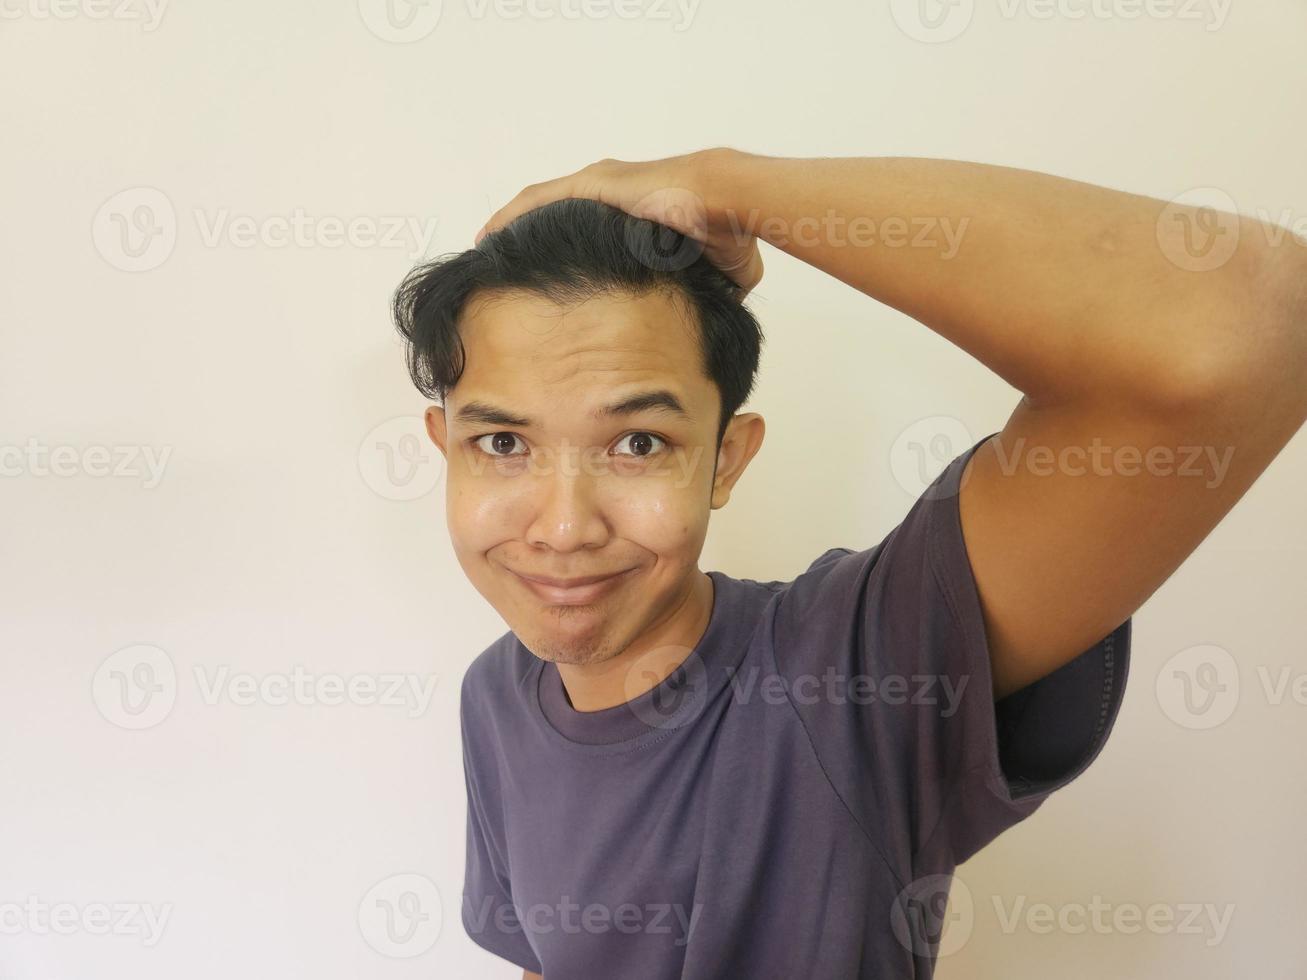 Shocked face of Asian man getting bald and lost hair in isolated white background photo